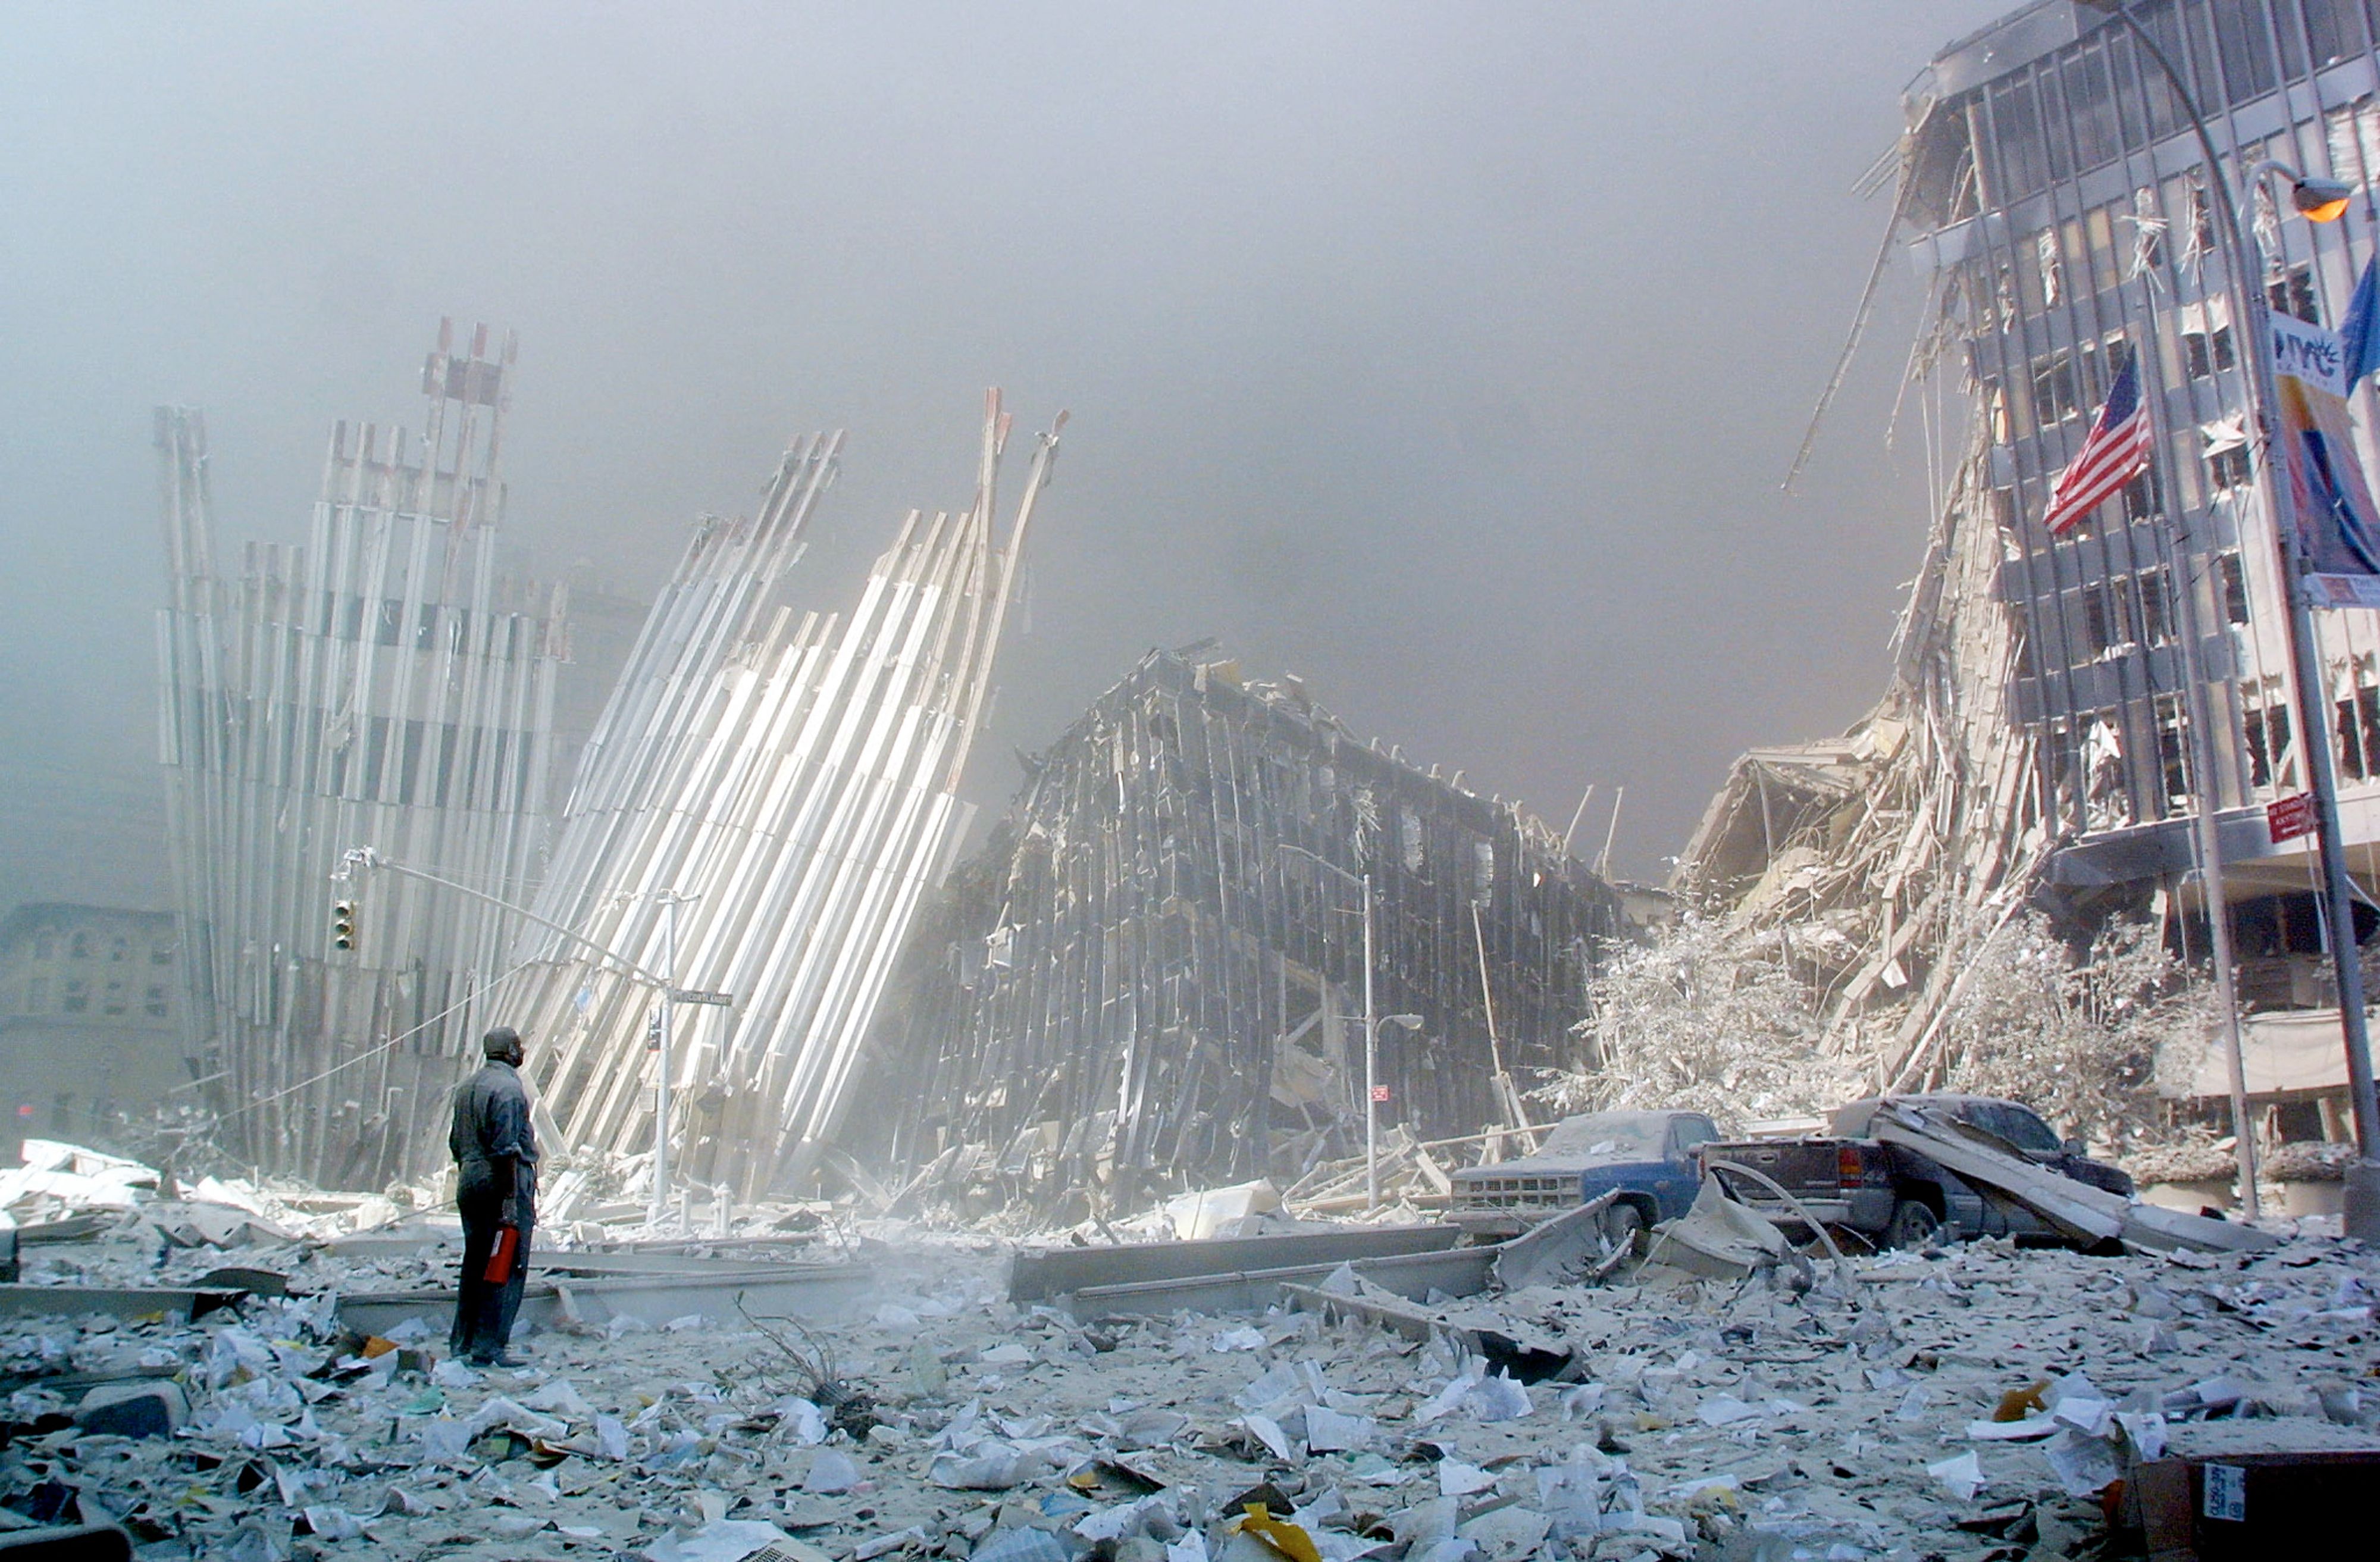 <p>A  man stands in the rubble and calls out asking if anyone needs help on 9/11</p>